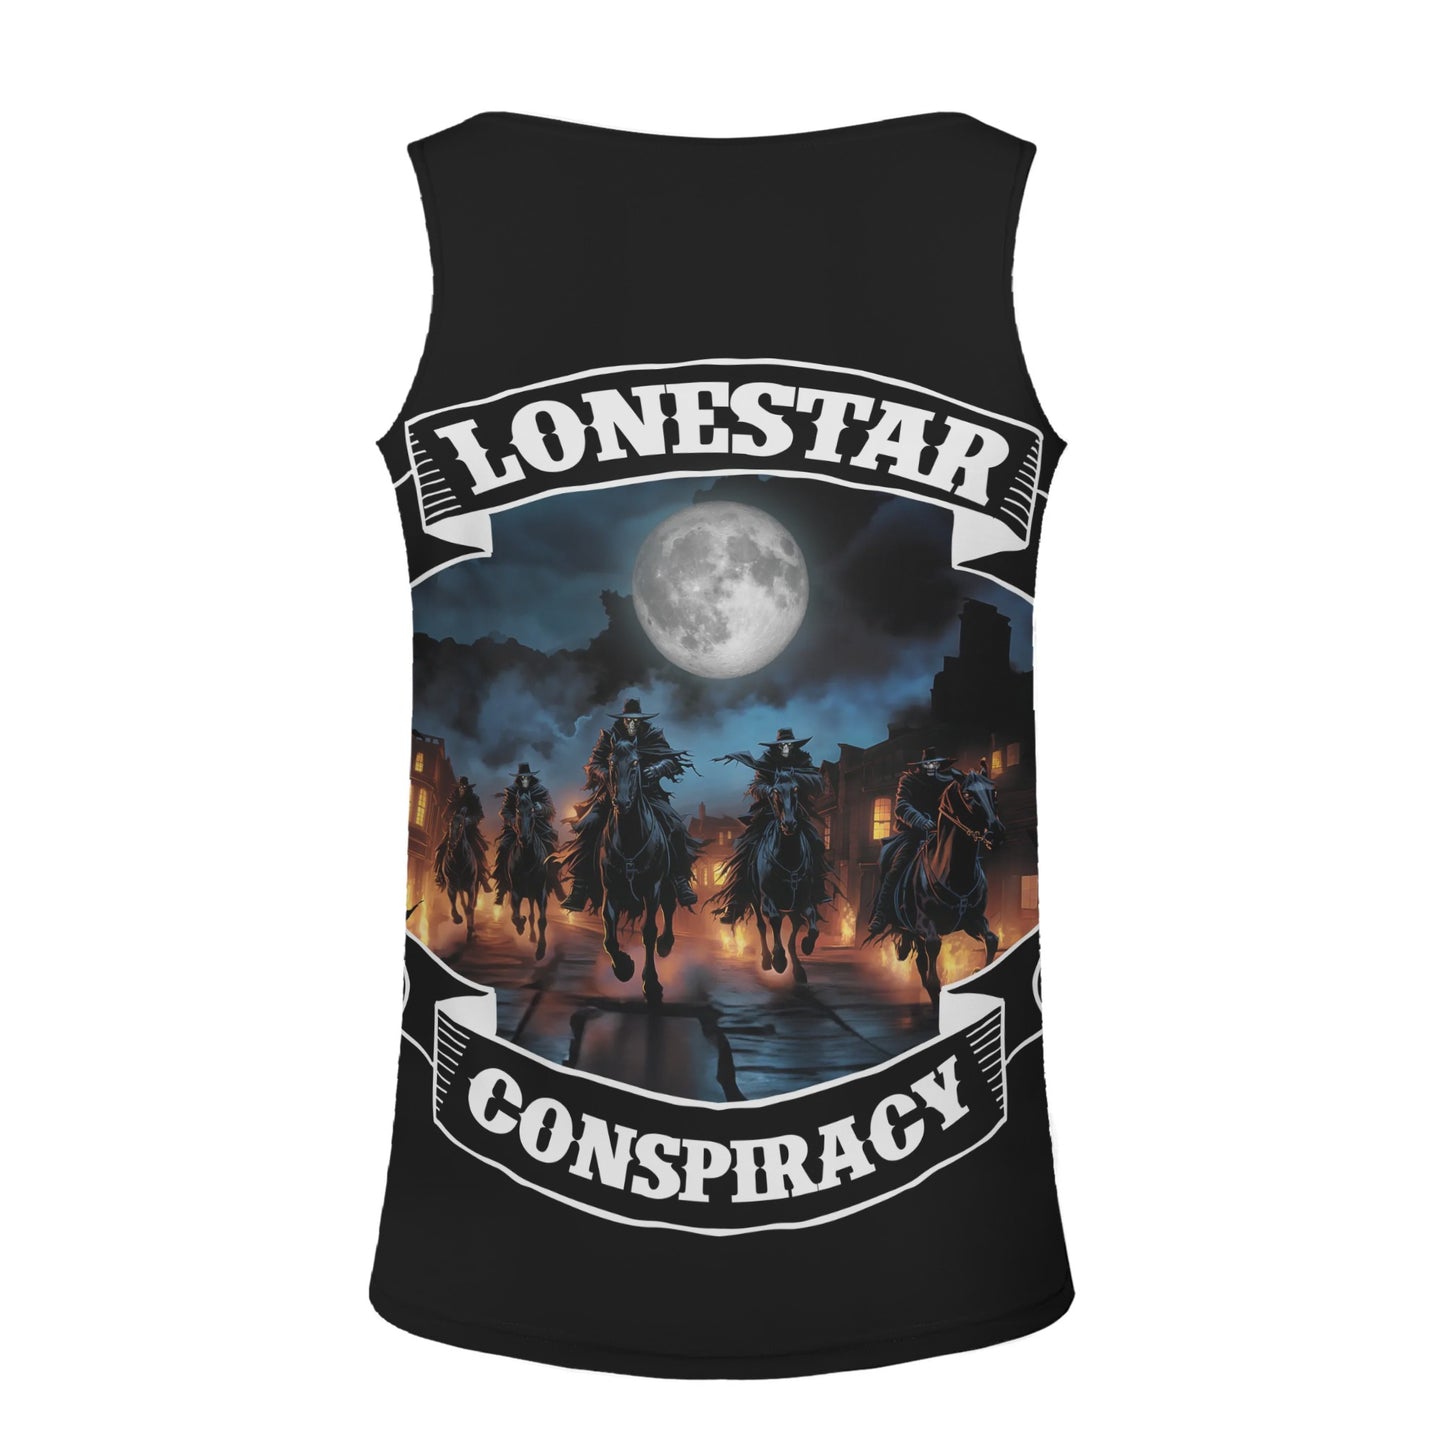 Mens Lonestar Conspicacy Tank Top (All Over Print)